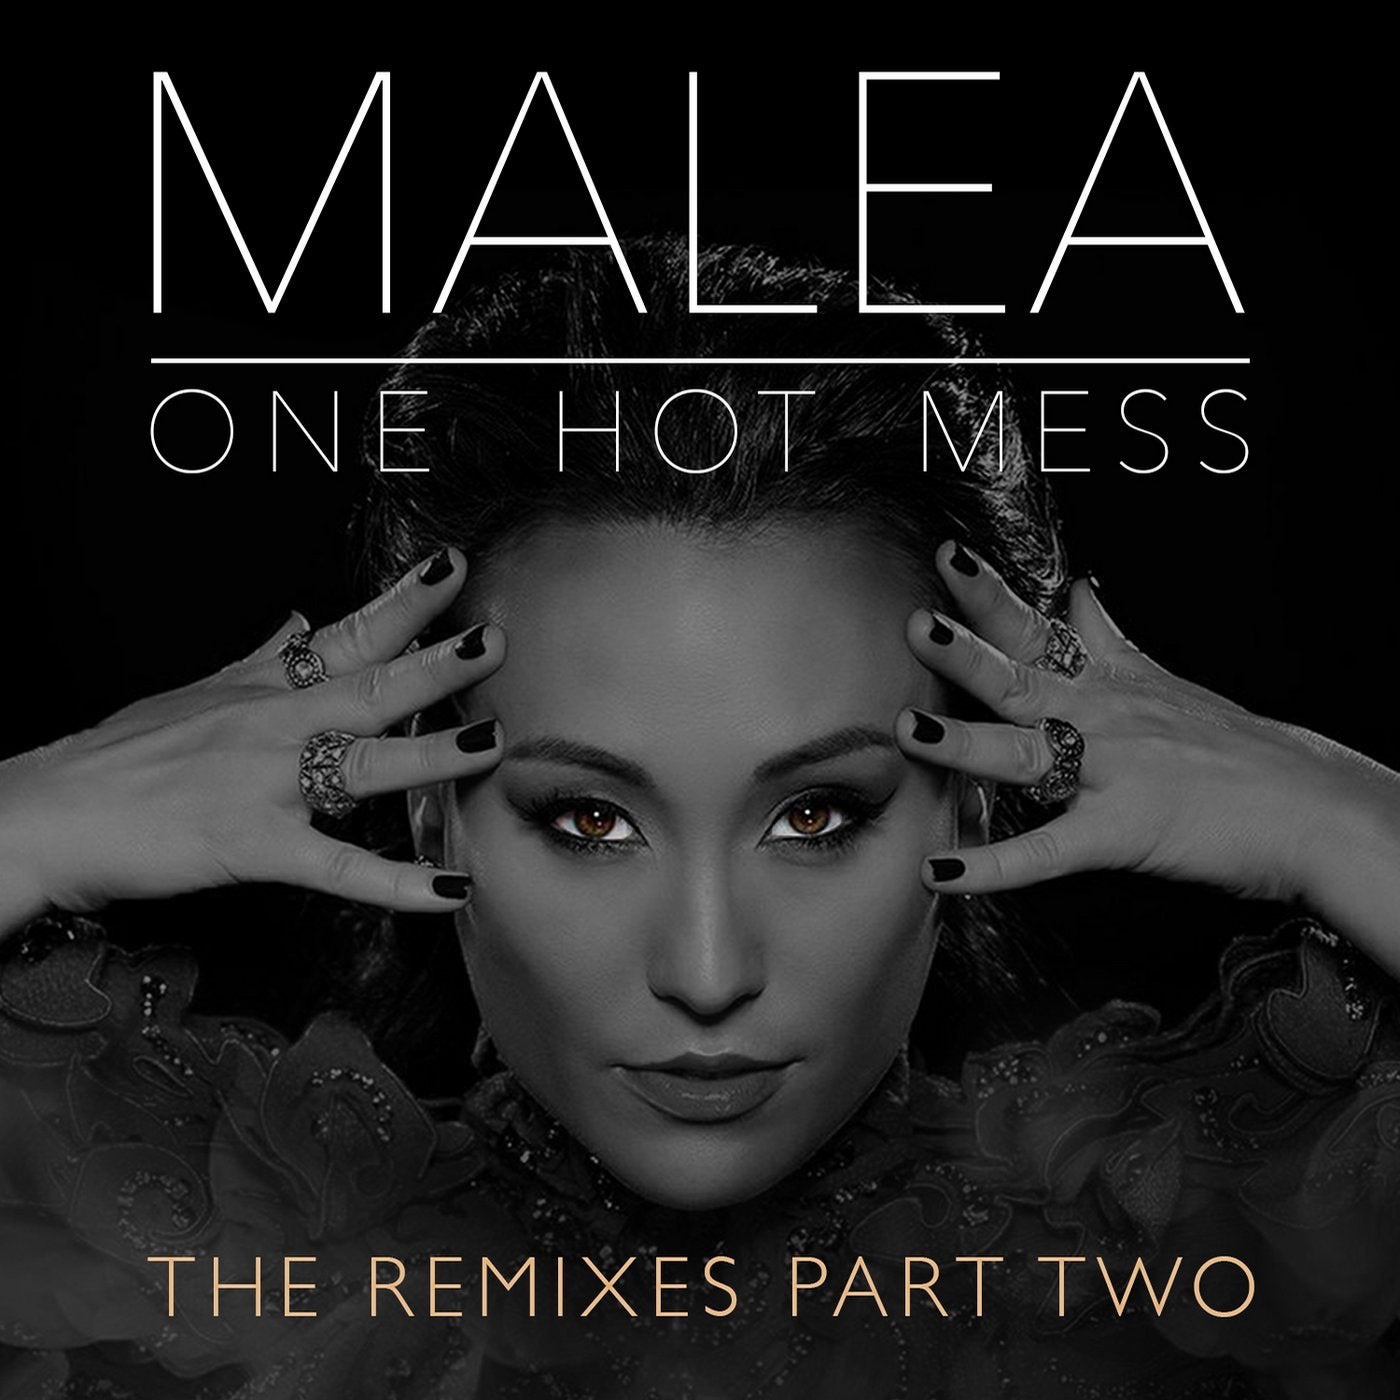 One Hot Mess - The Remixes Part Two